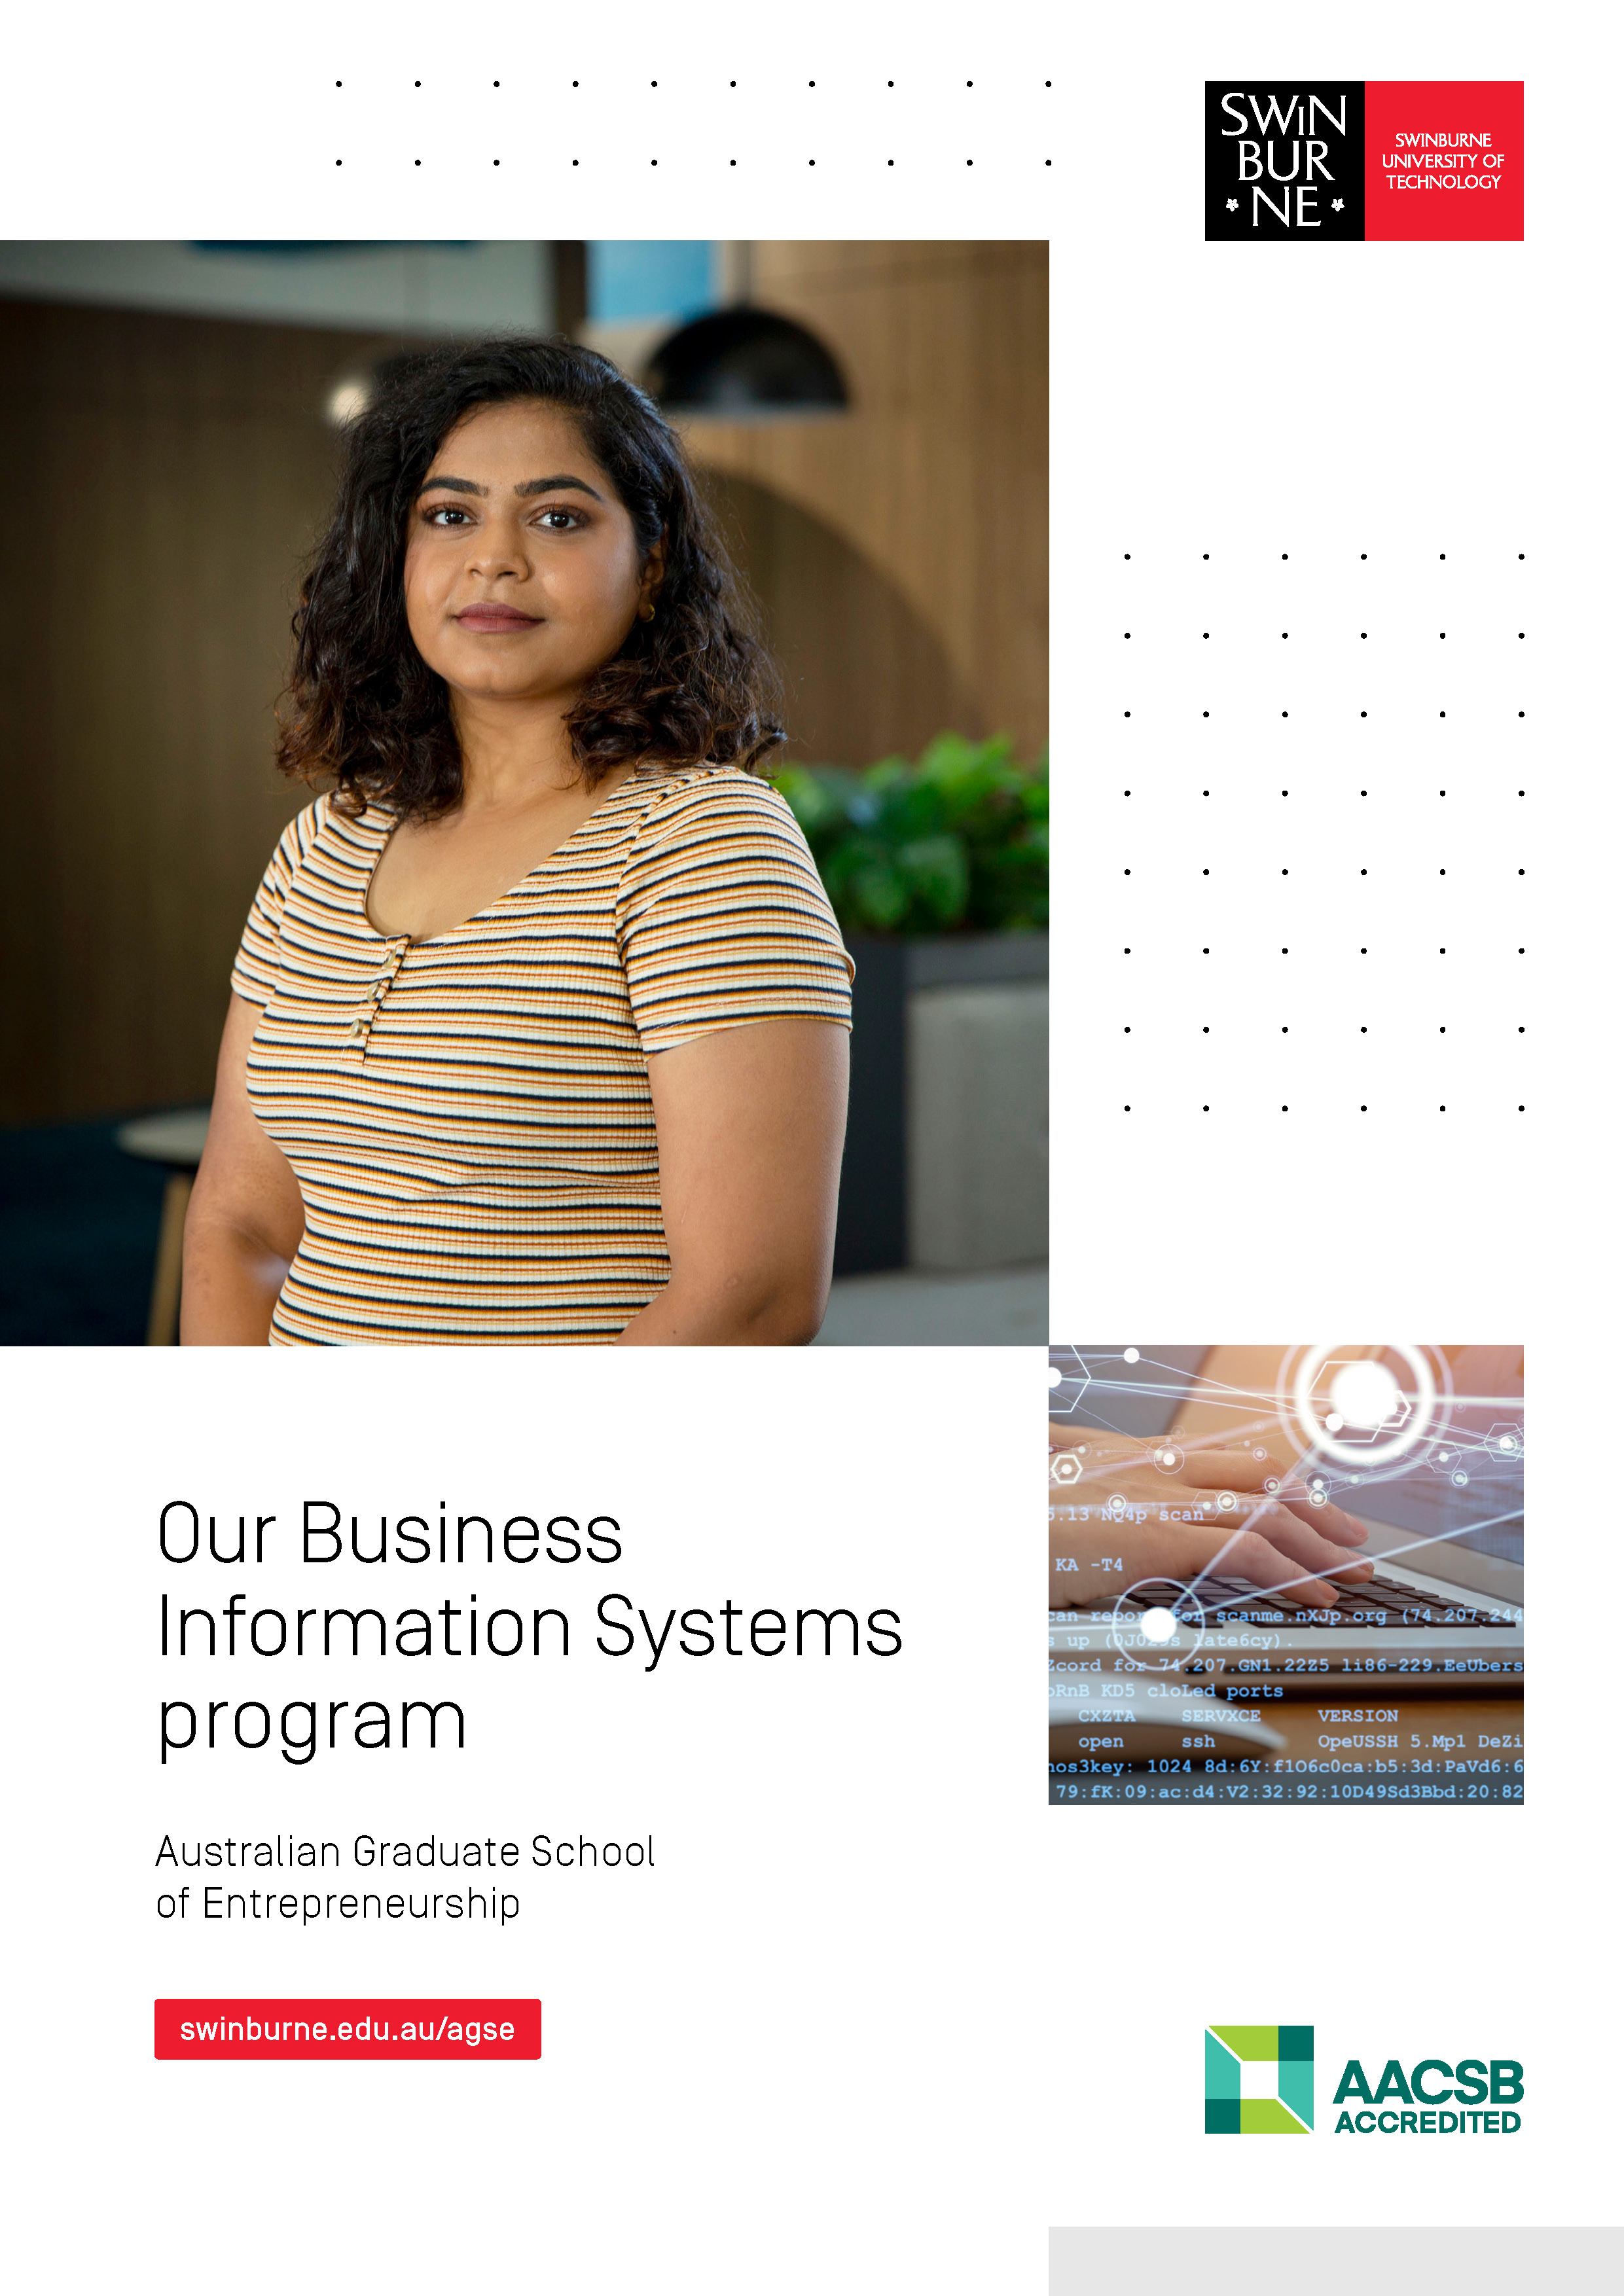 Study a Master of Business Information Systems at Swinburne